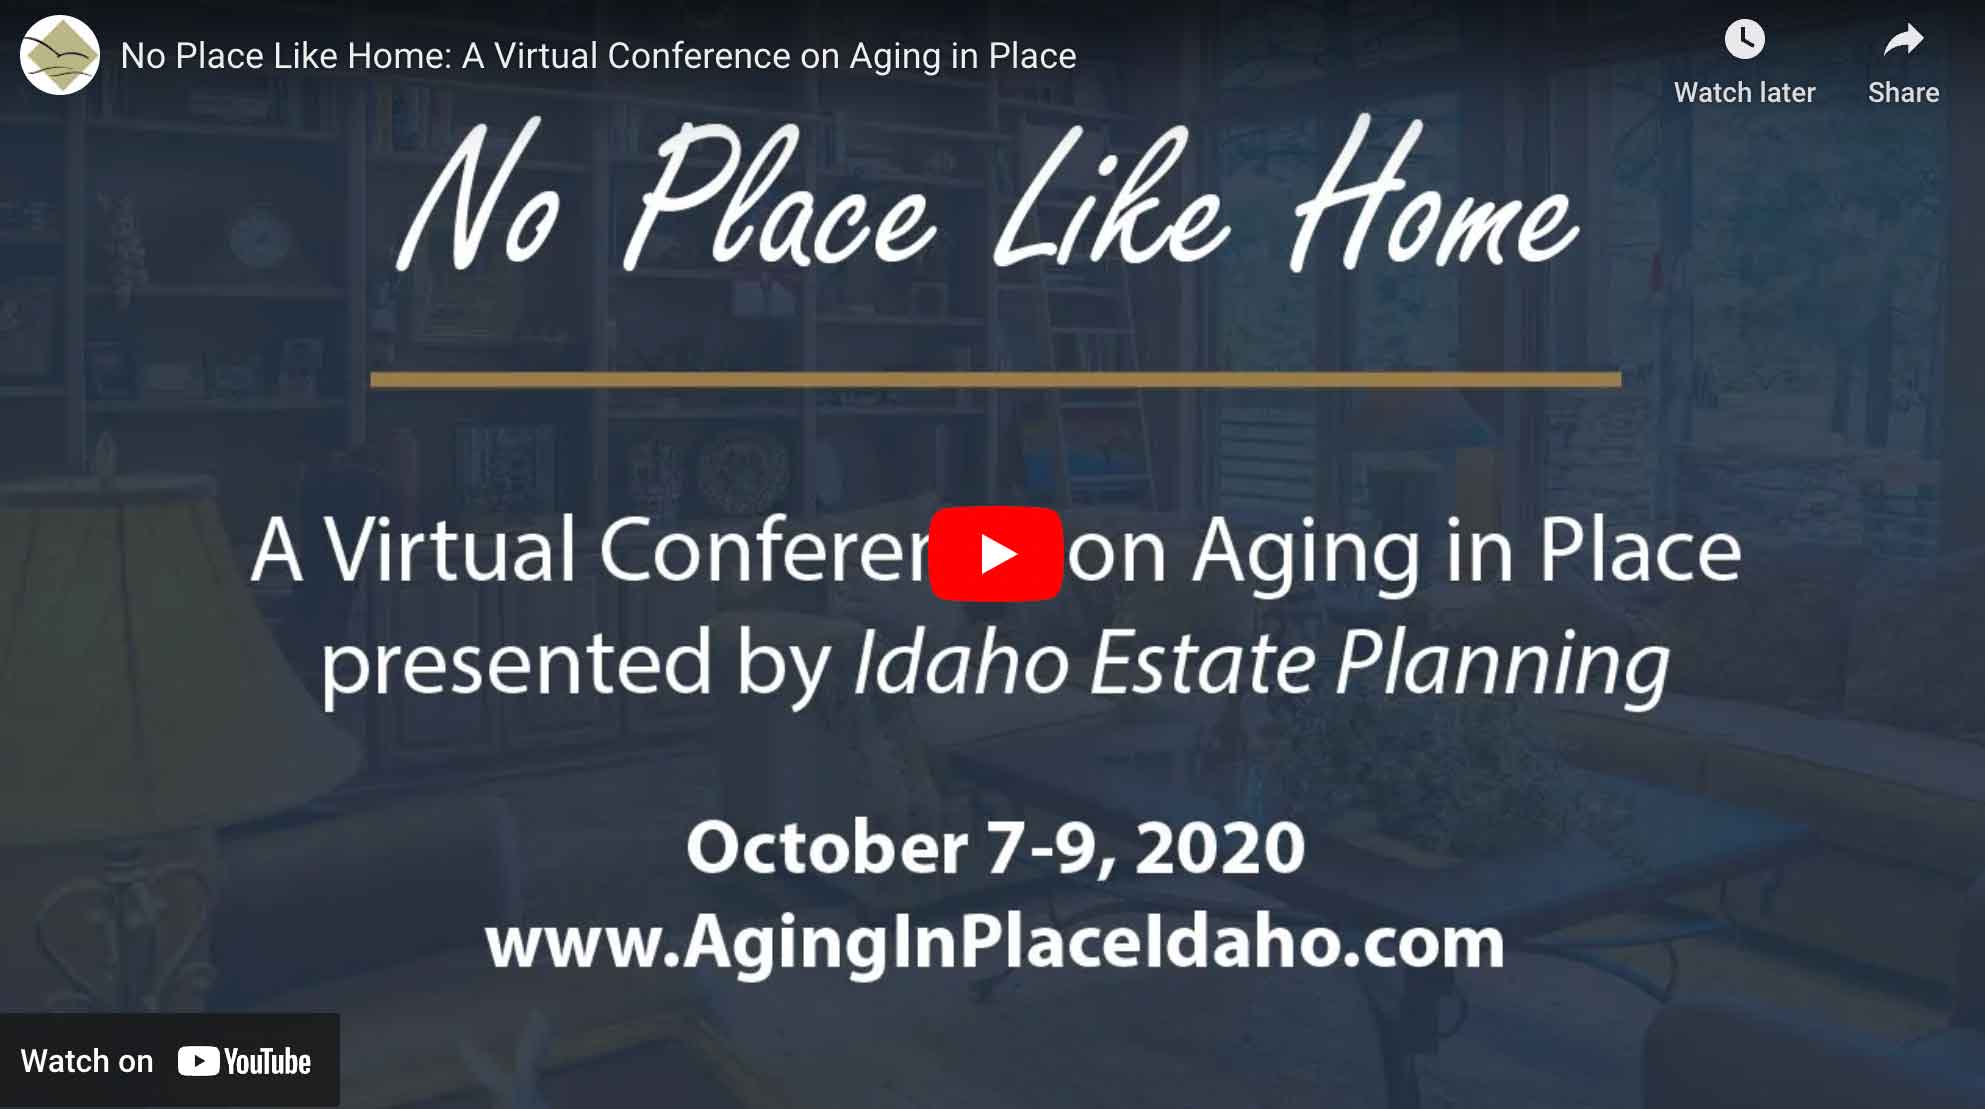 No Place Like Home: A Virtual Conference on Aging in Place